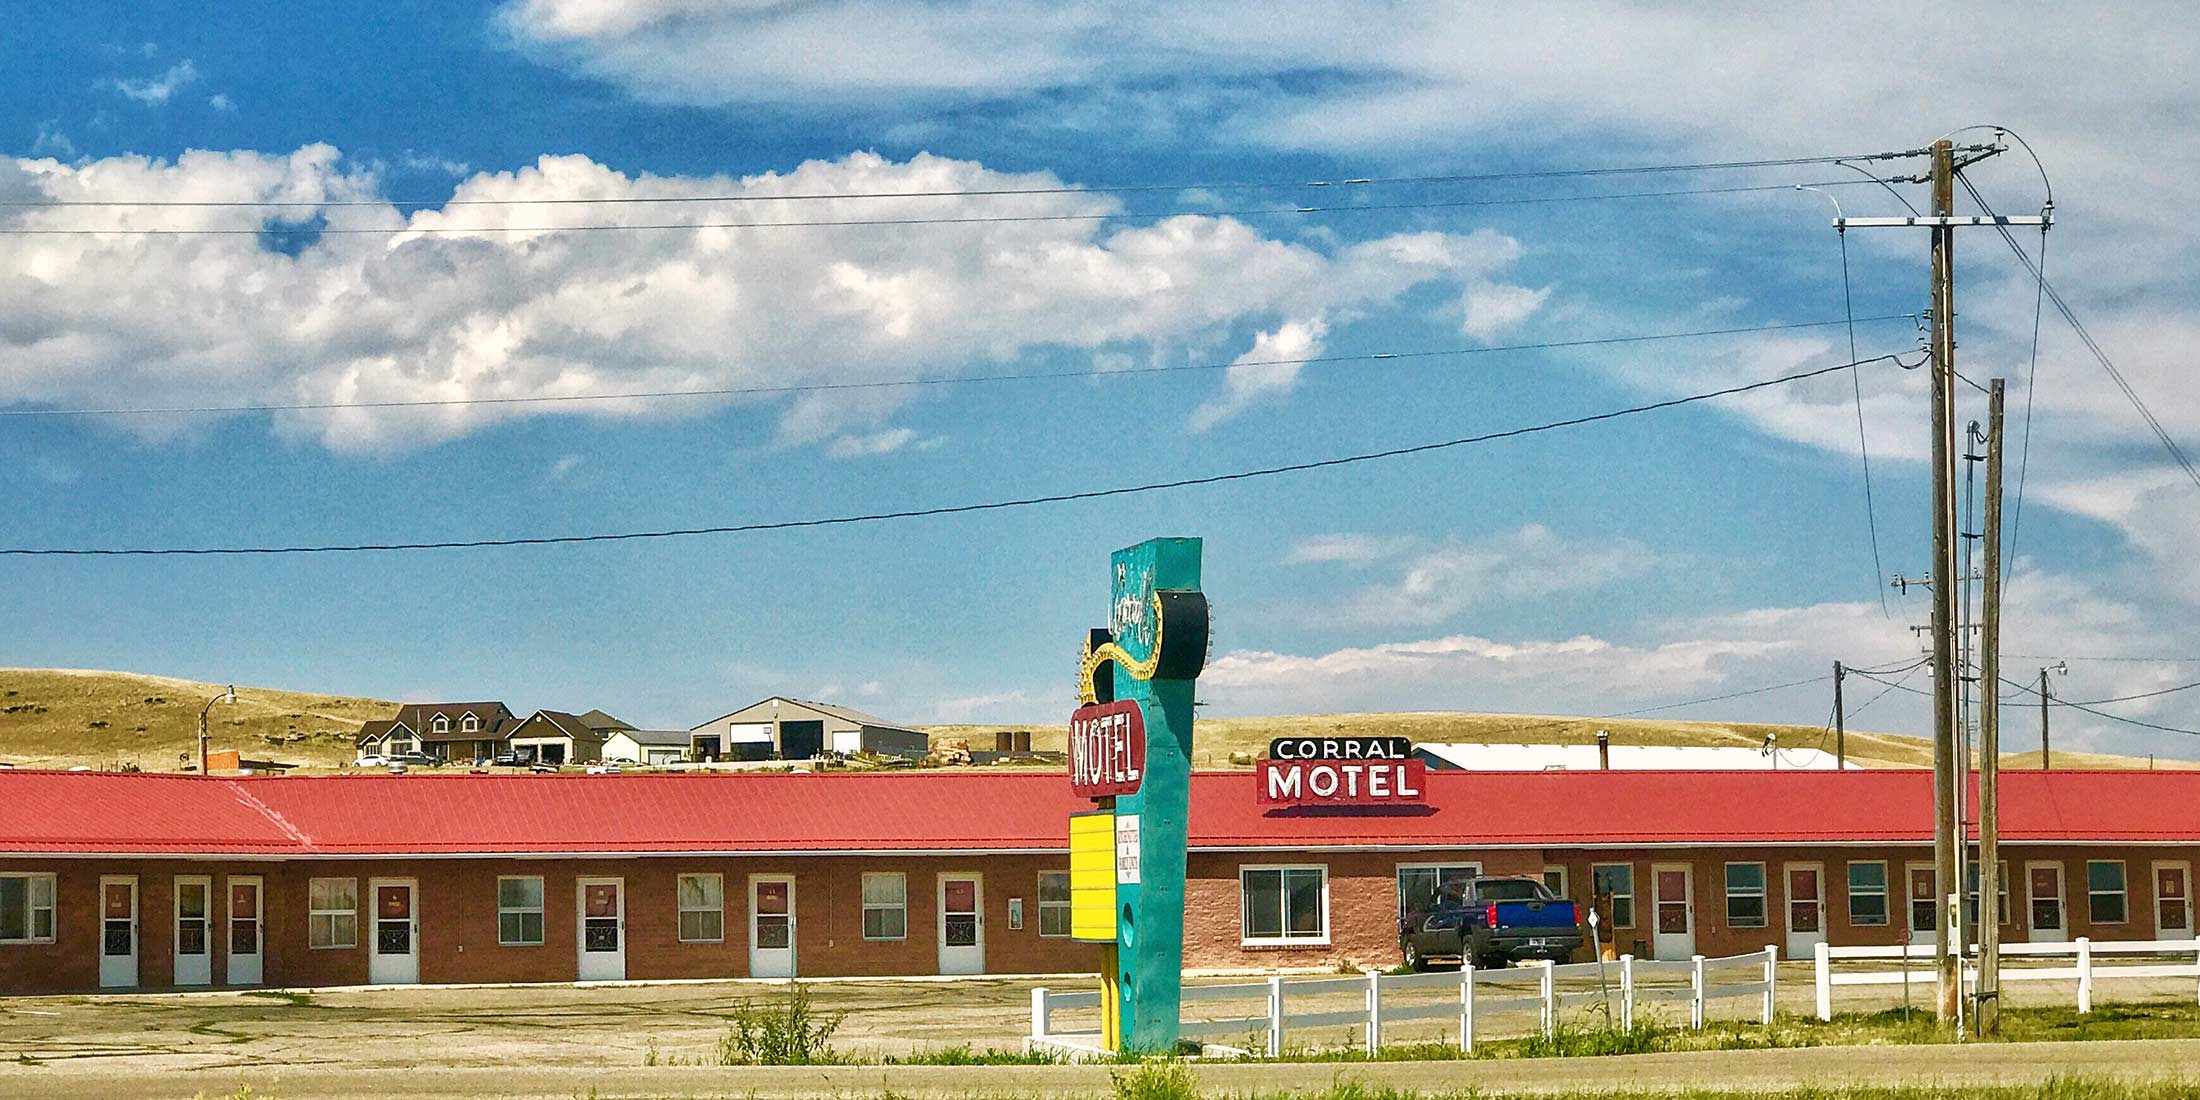 Located on 3rd Street North, Highway 12, in Harlowton, Montana - Wheatland County.